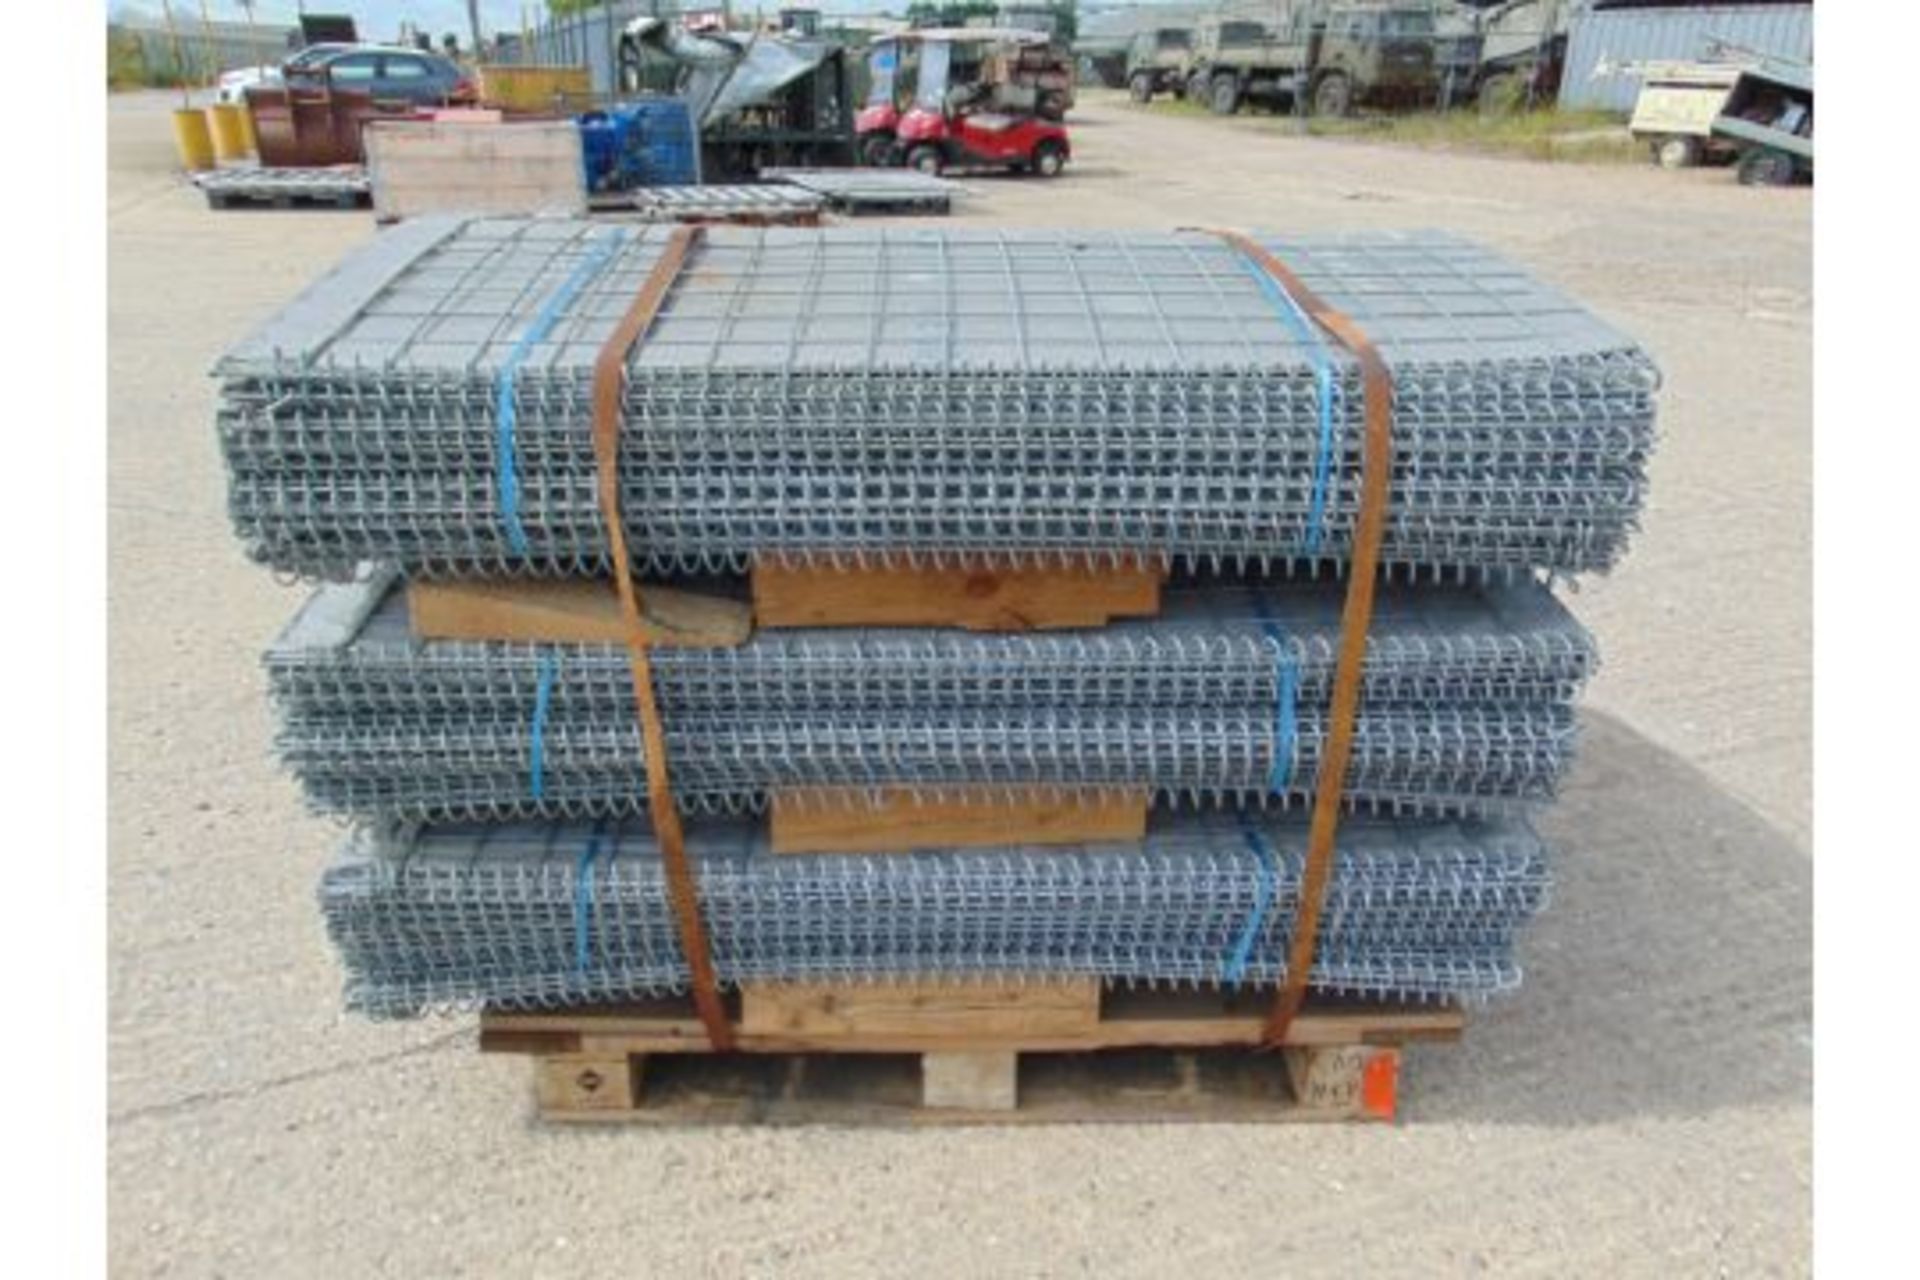 From UK MOD New Unissued HESCO Concertainer MIL 1 Height 1.37m Width 1.06m Length 10m - Image 7 of 7